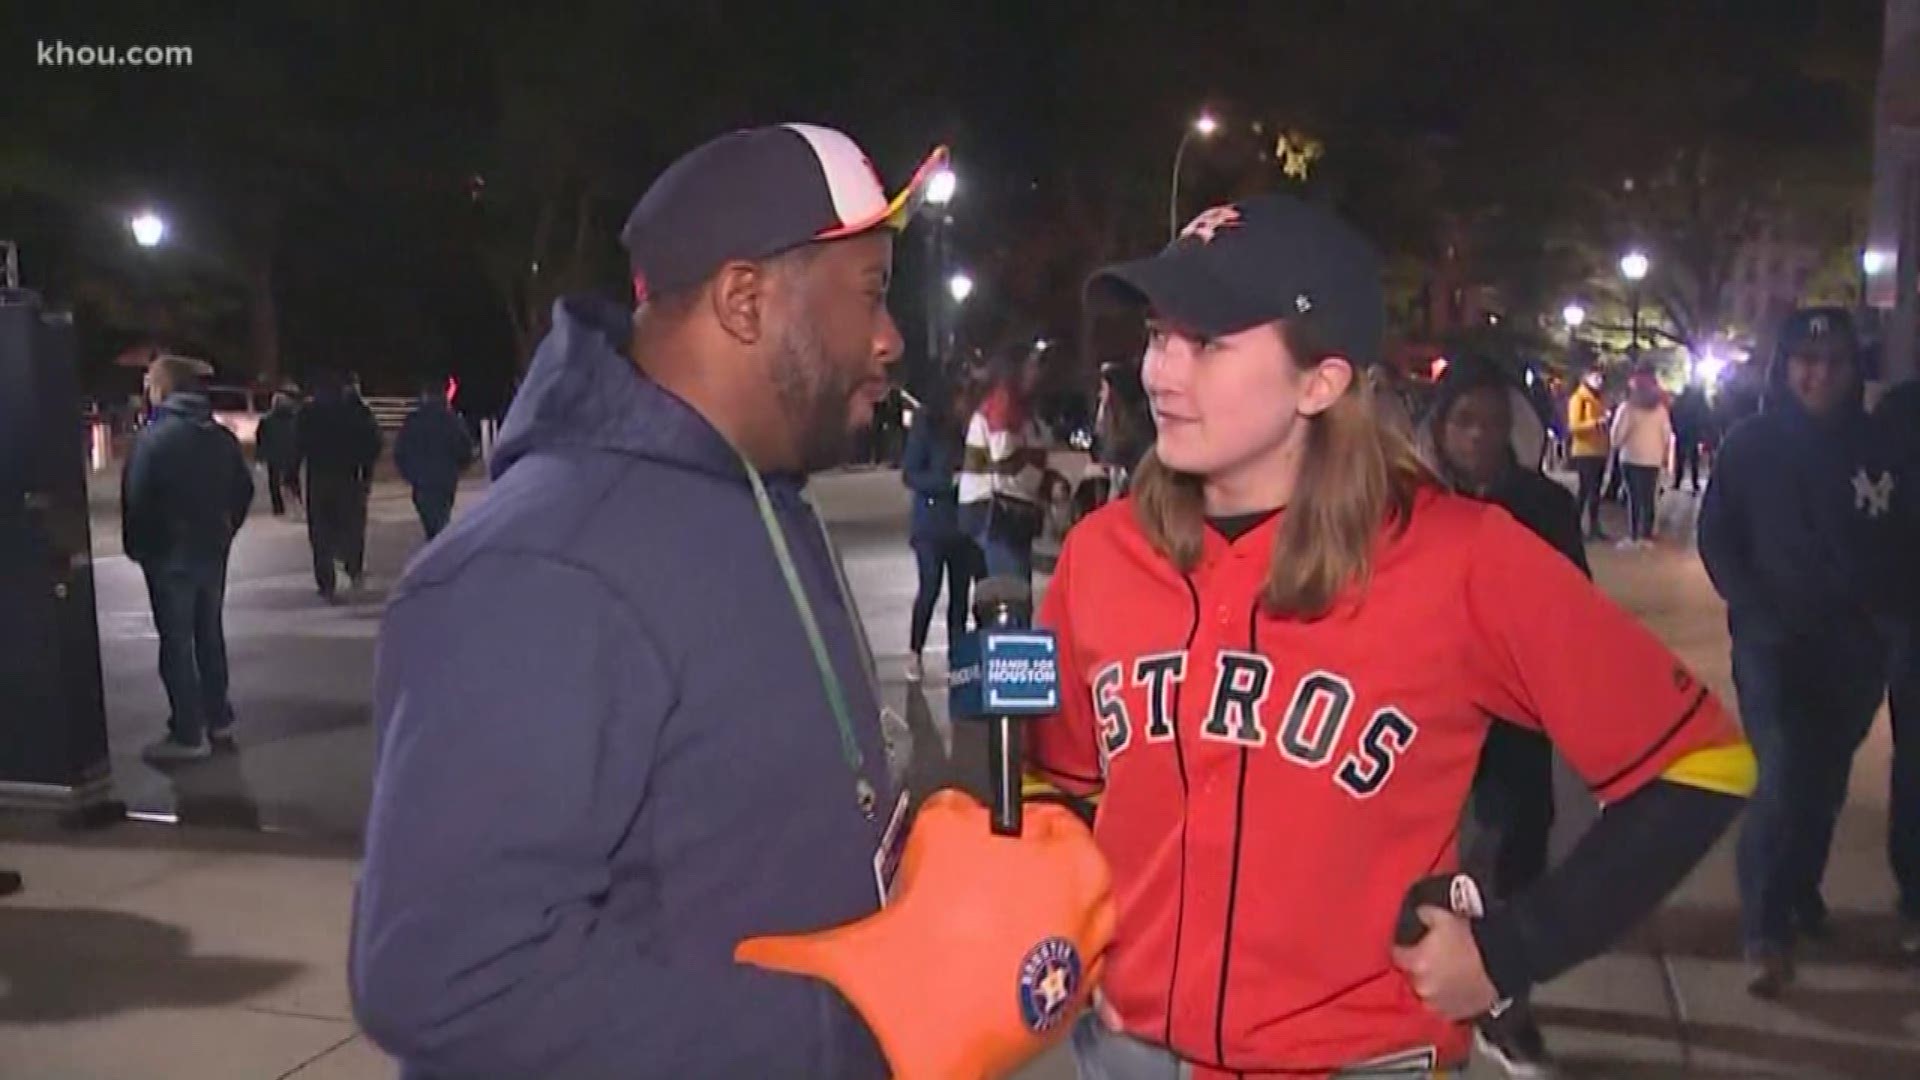 Houston Astros fans were disappointed after the team lost to the Yankees in Game 5 of the ALCS.